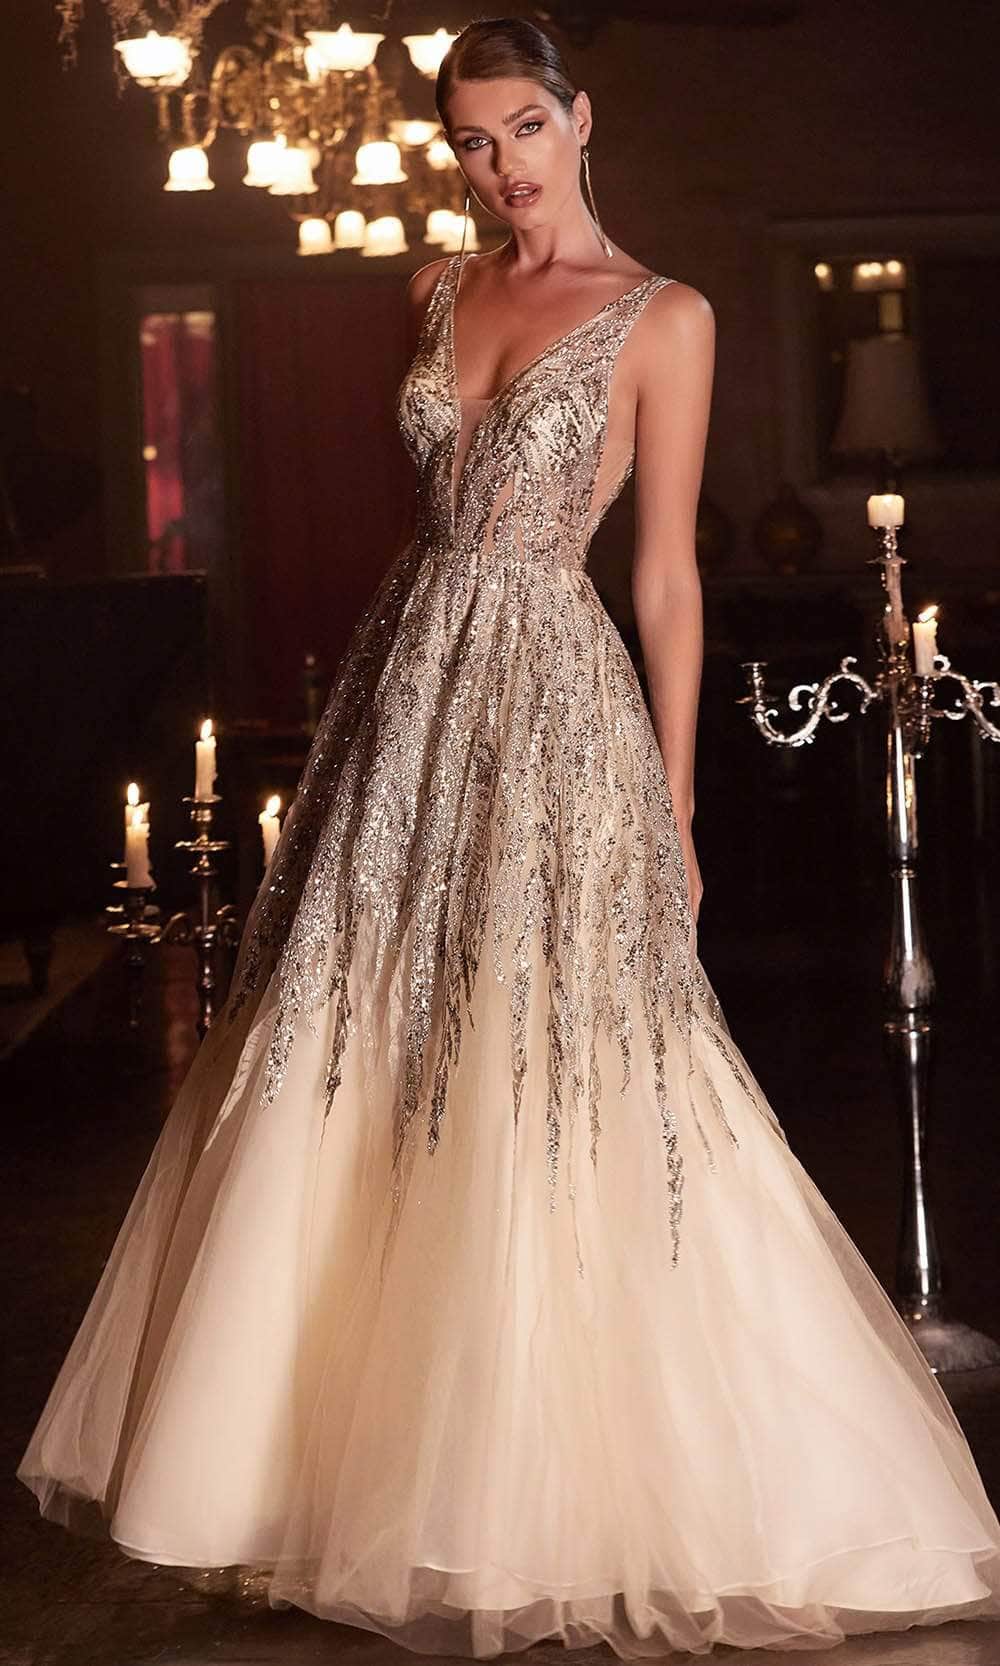 Cinderella Divine - Embellished Sleeveless Prom Dress C135 - 1 pc Champagne In Size 12 Available CCSALE 12 / Champagne